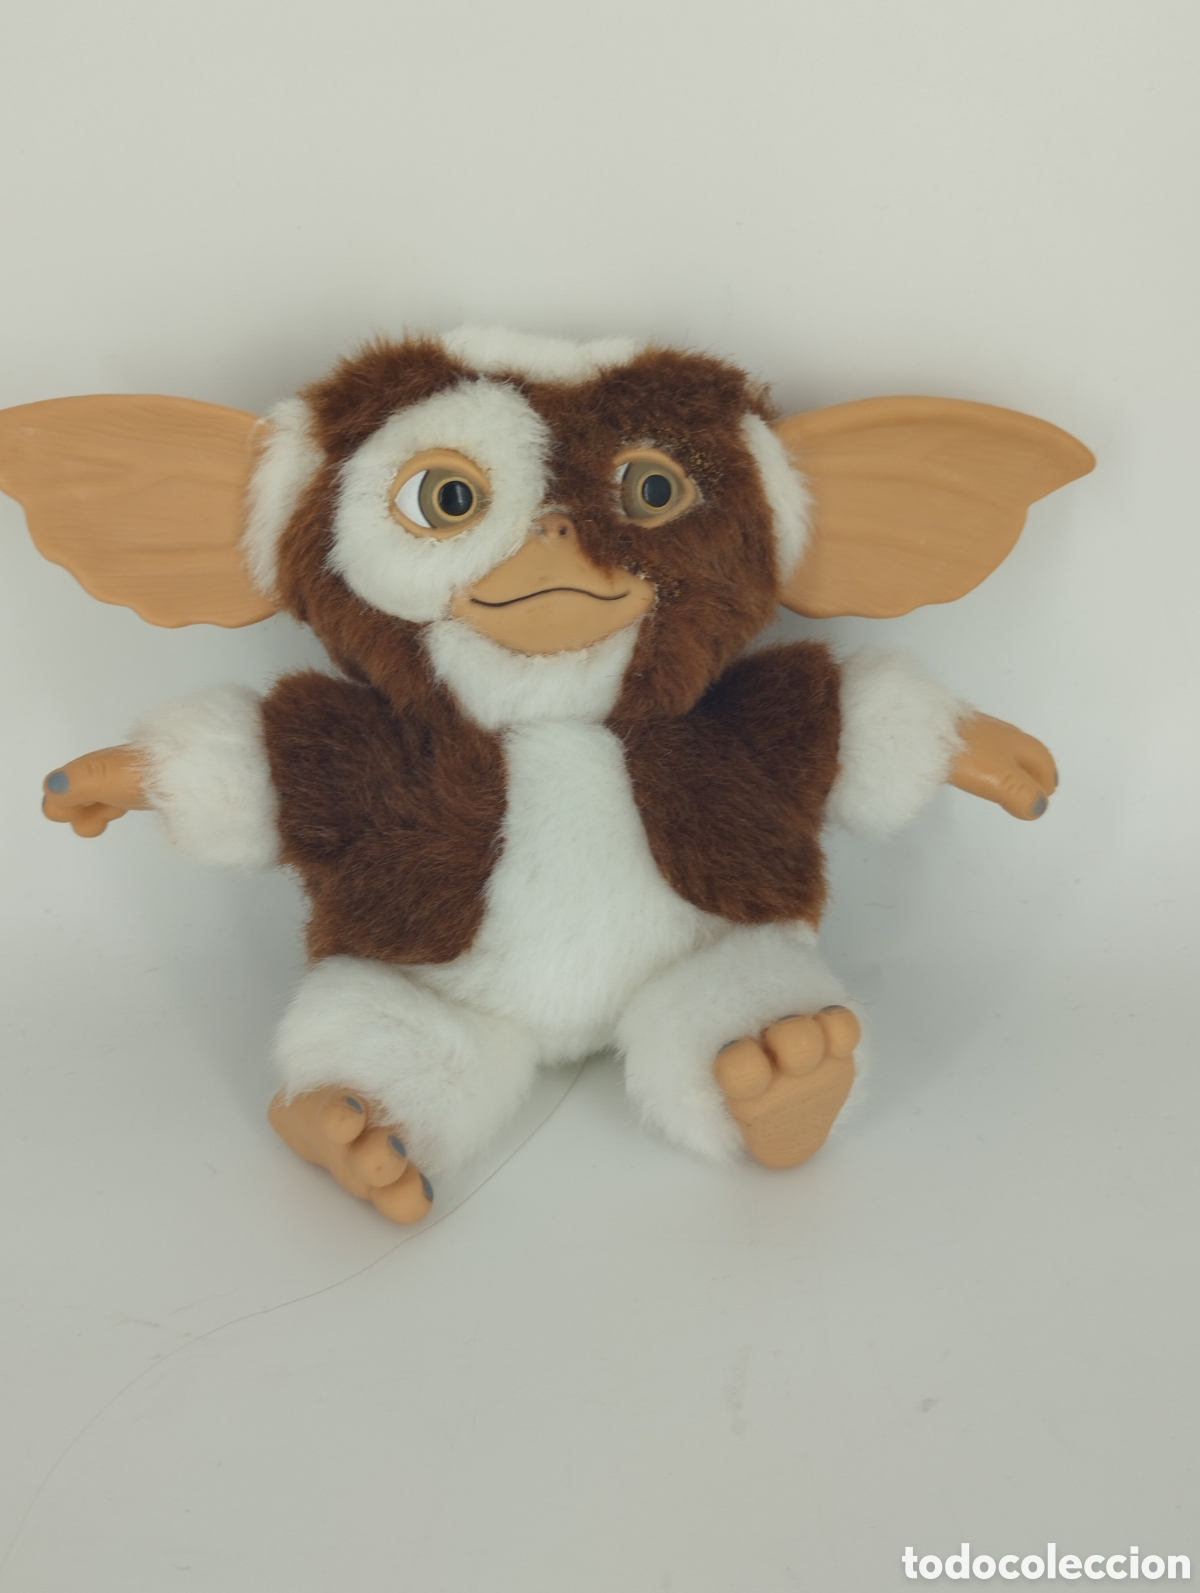 peluche gizmo de la película gremlins. neca. - Buy Teddy bears and other  plush and soft toys on todocoleccion